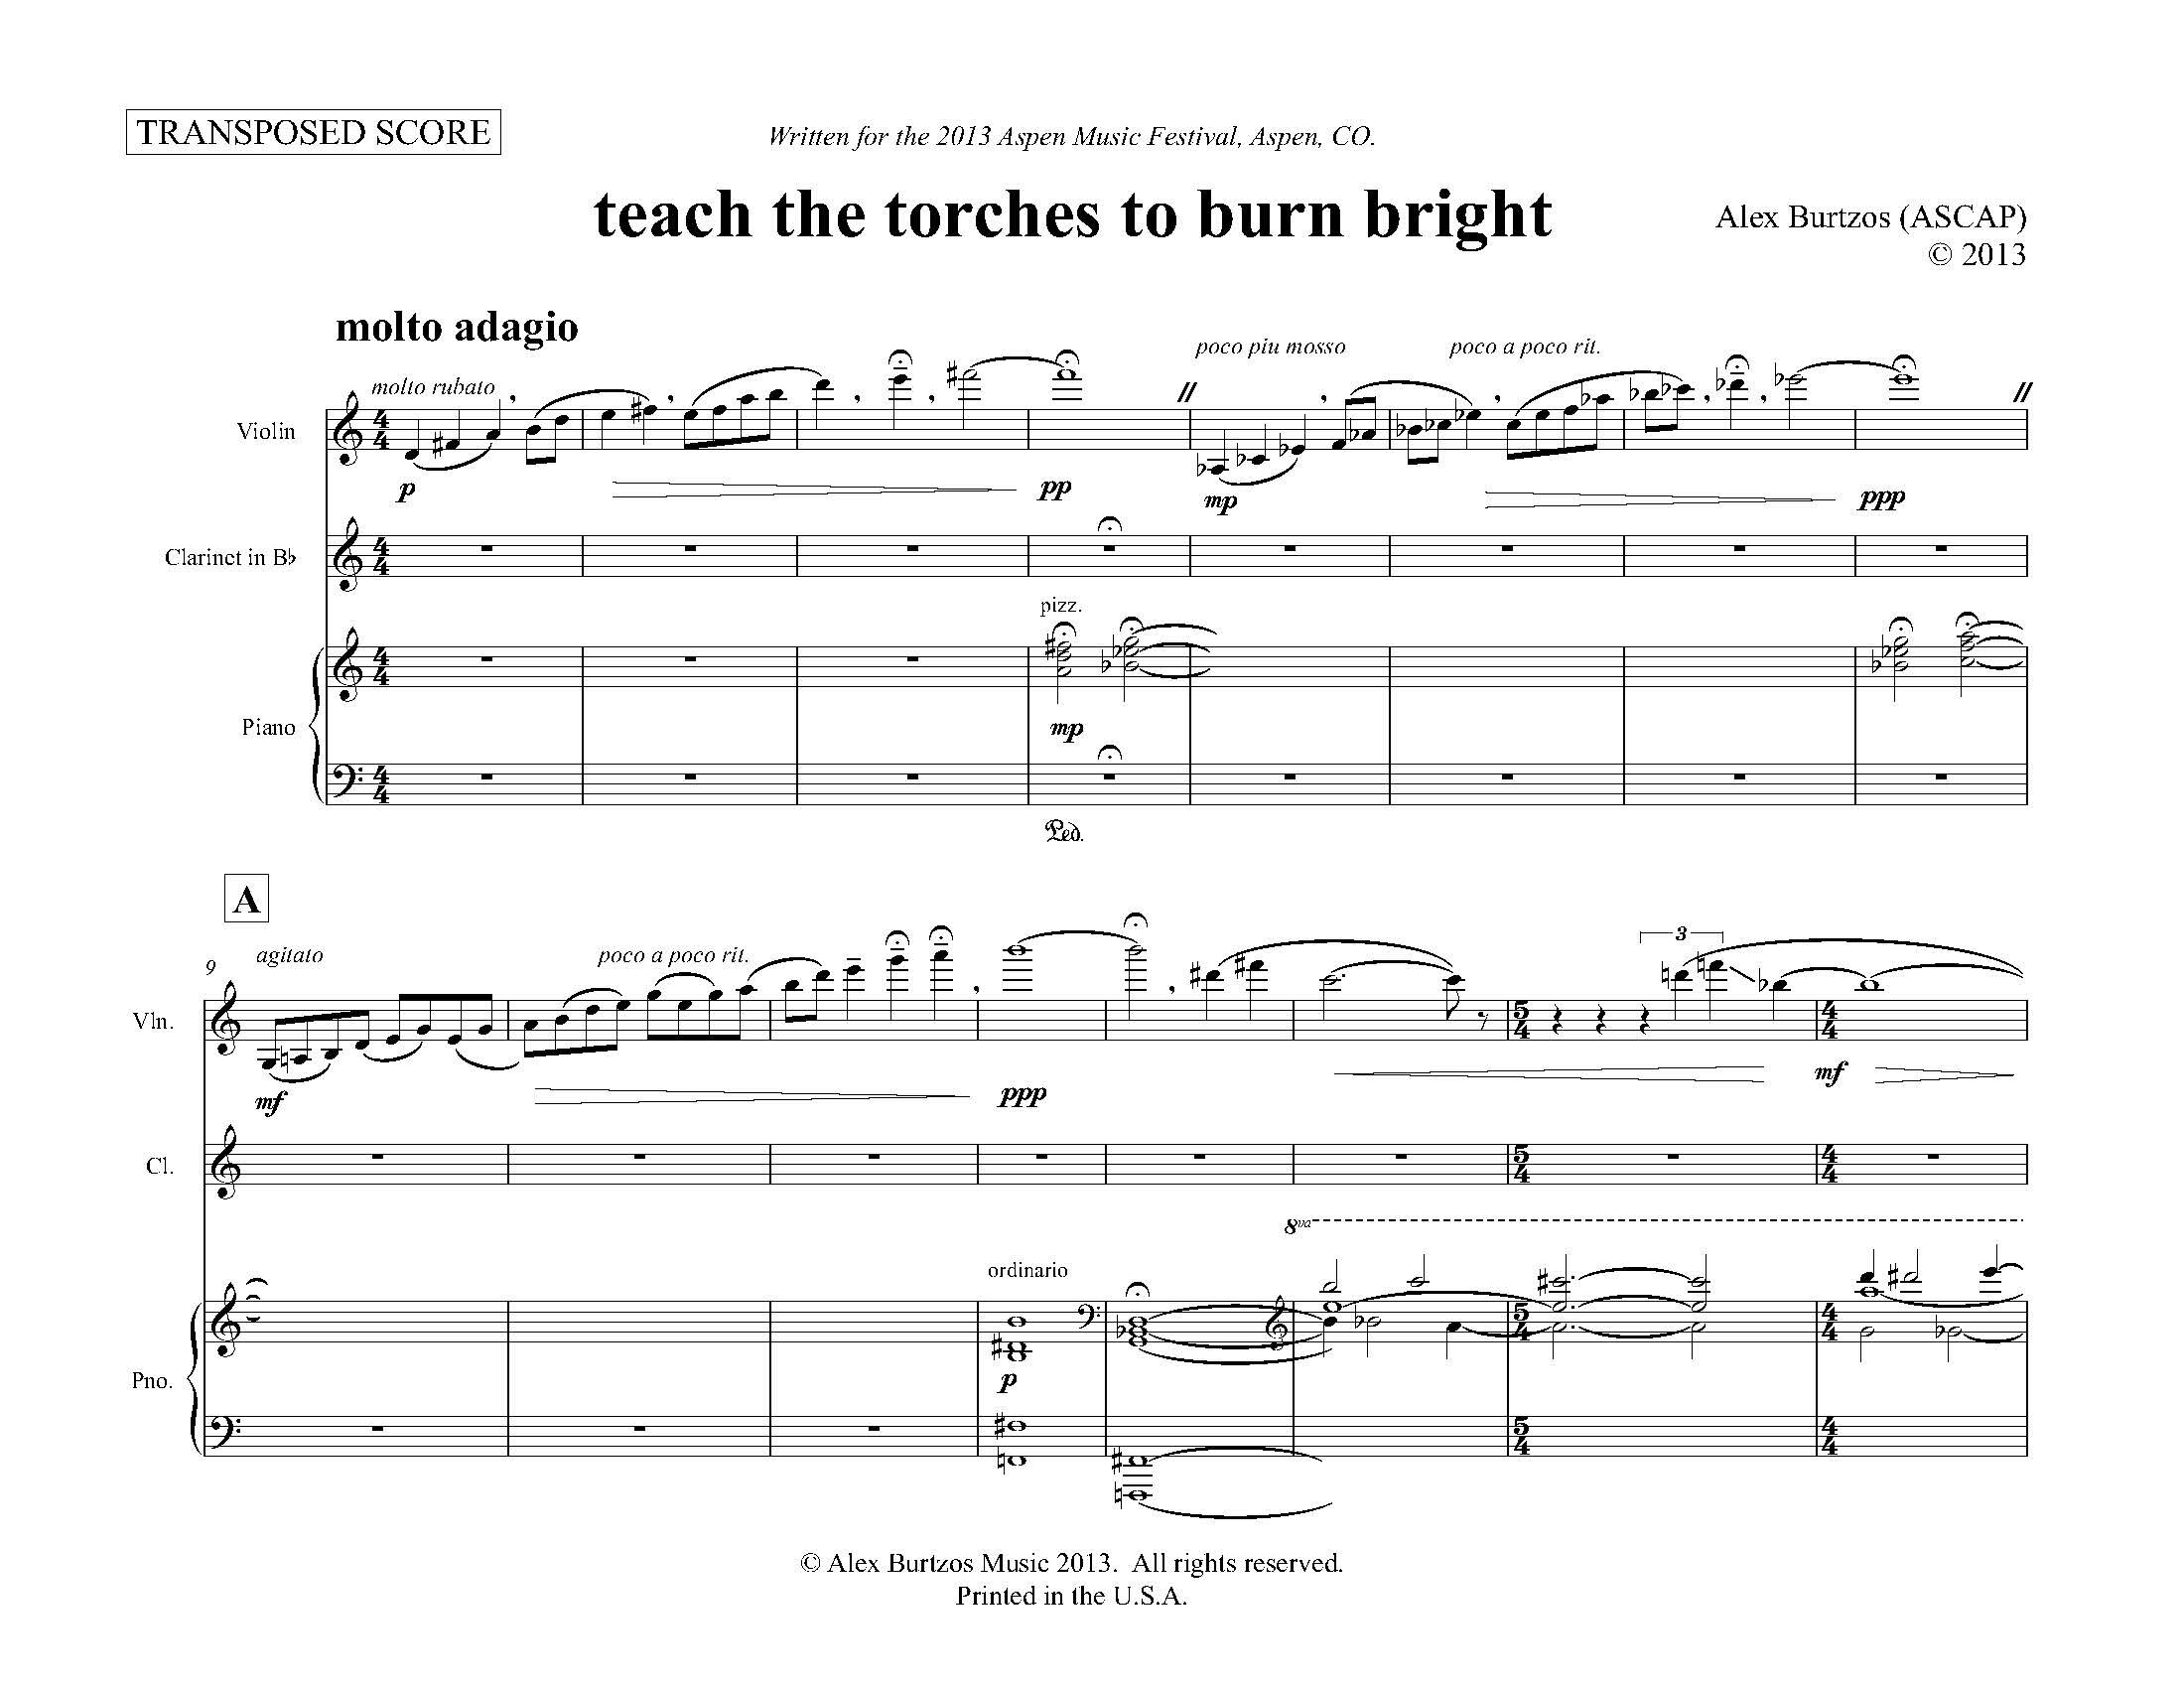 Teach the Torches to Burn Bright - Complete Score_Page_07.jpg